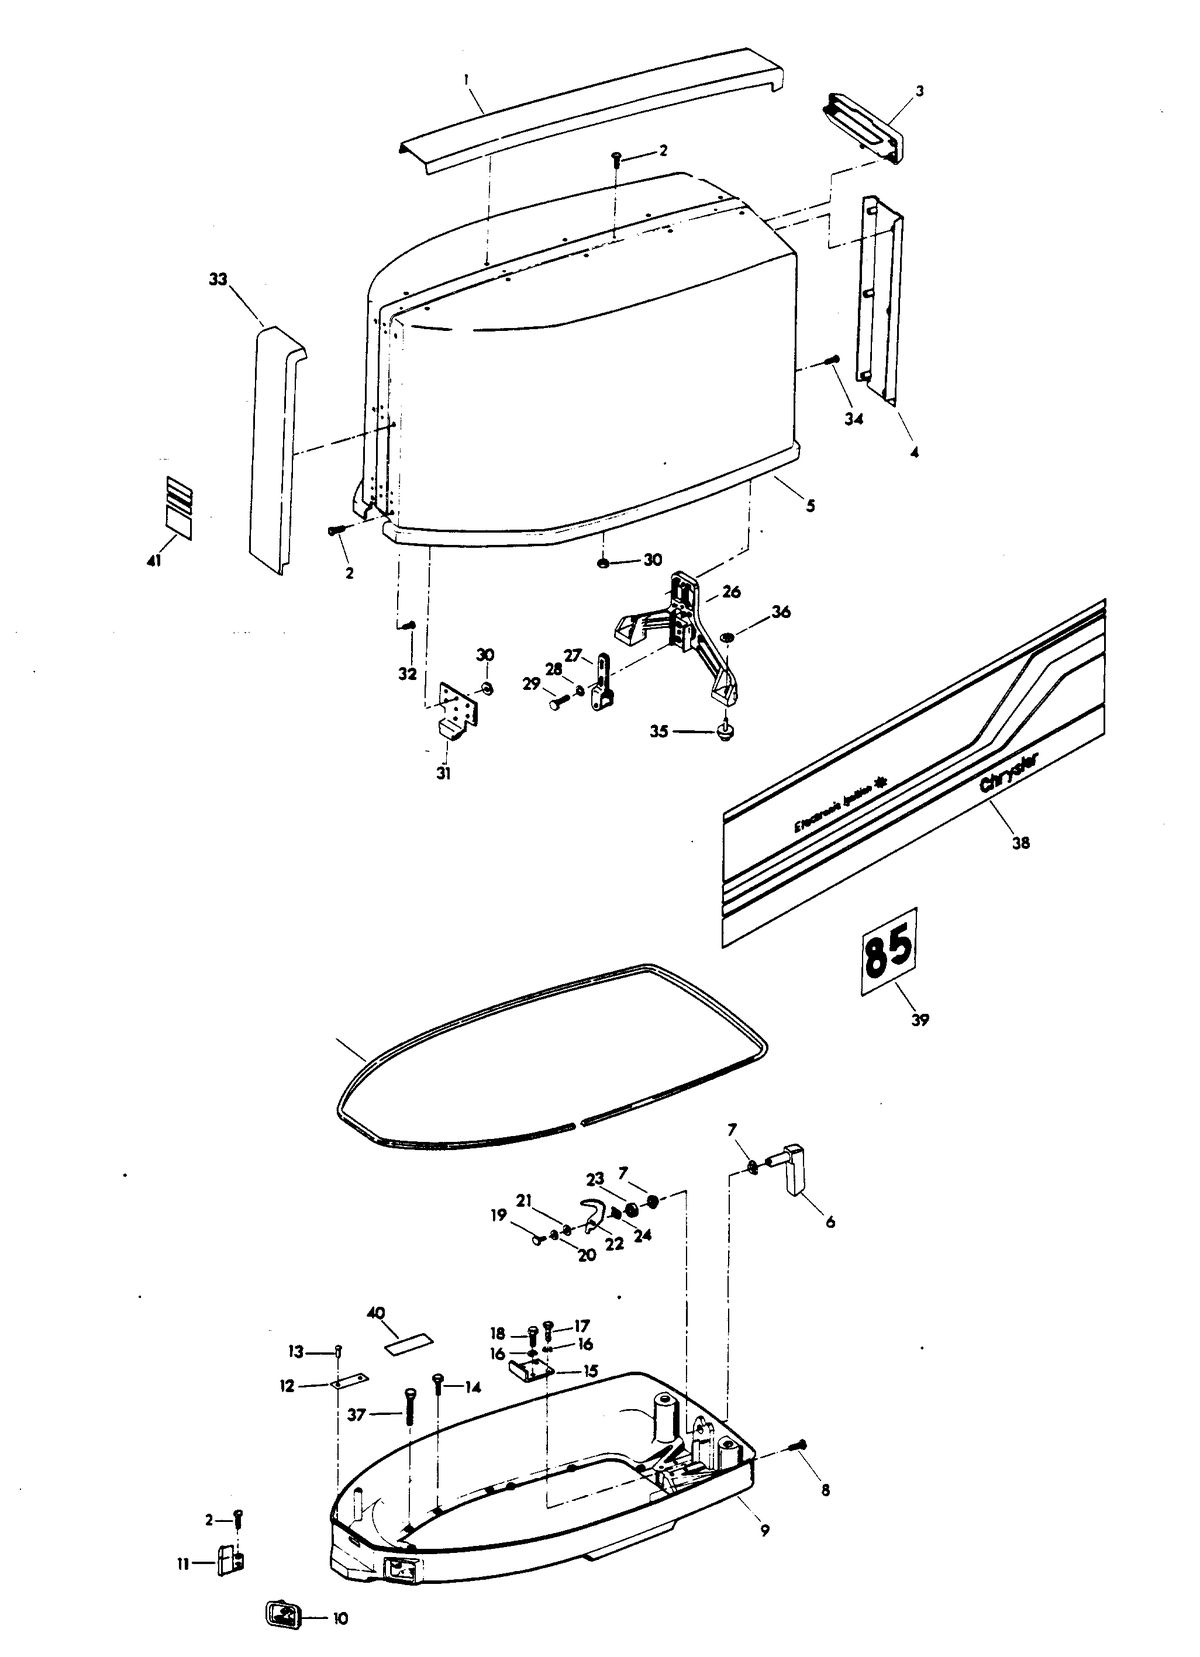 CHRYSLER 85 H.P. ENGINE COVER AND SUPPORT PLATE